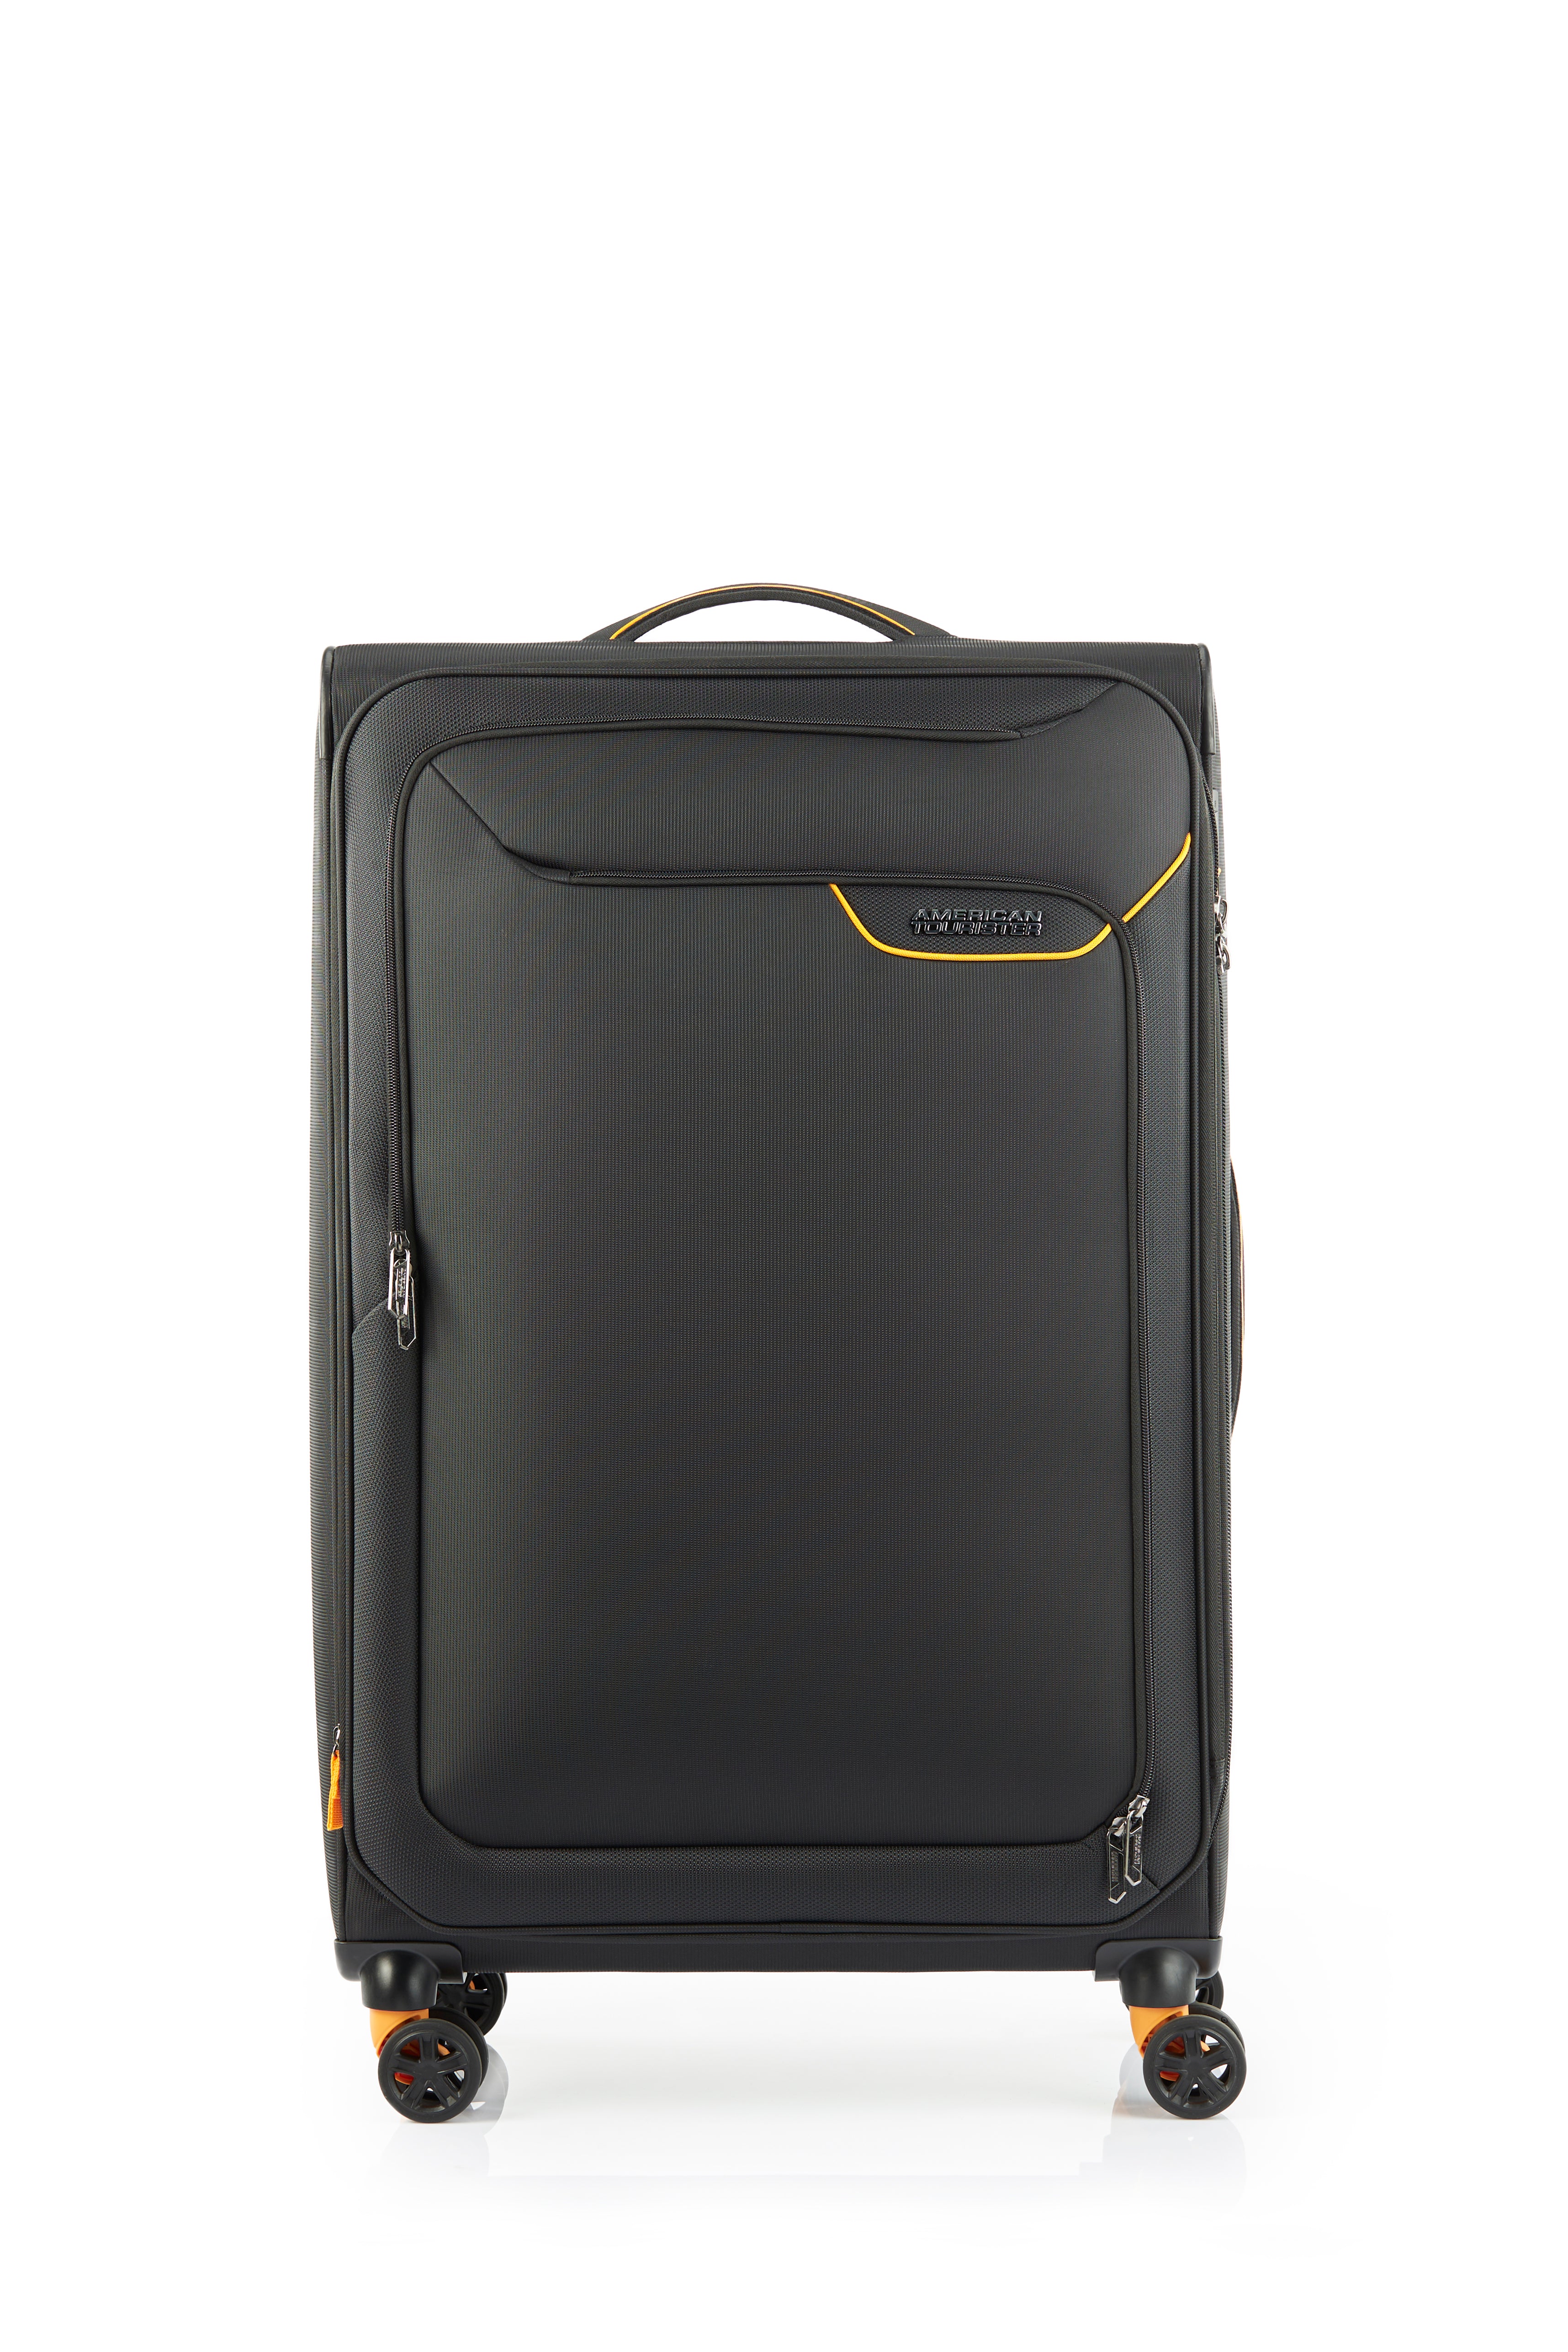 American Tourister - Applite ECO 82cm Large Suitcase - Black/Must - 0